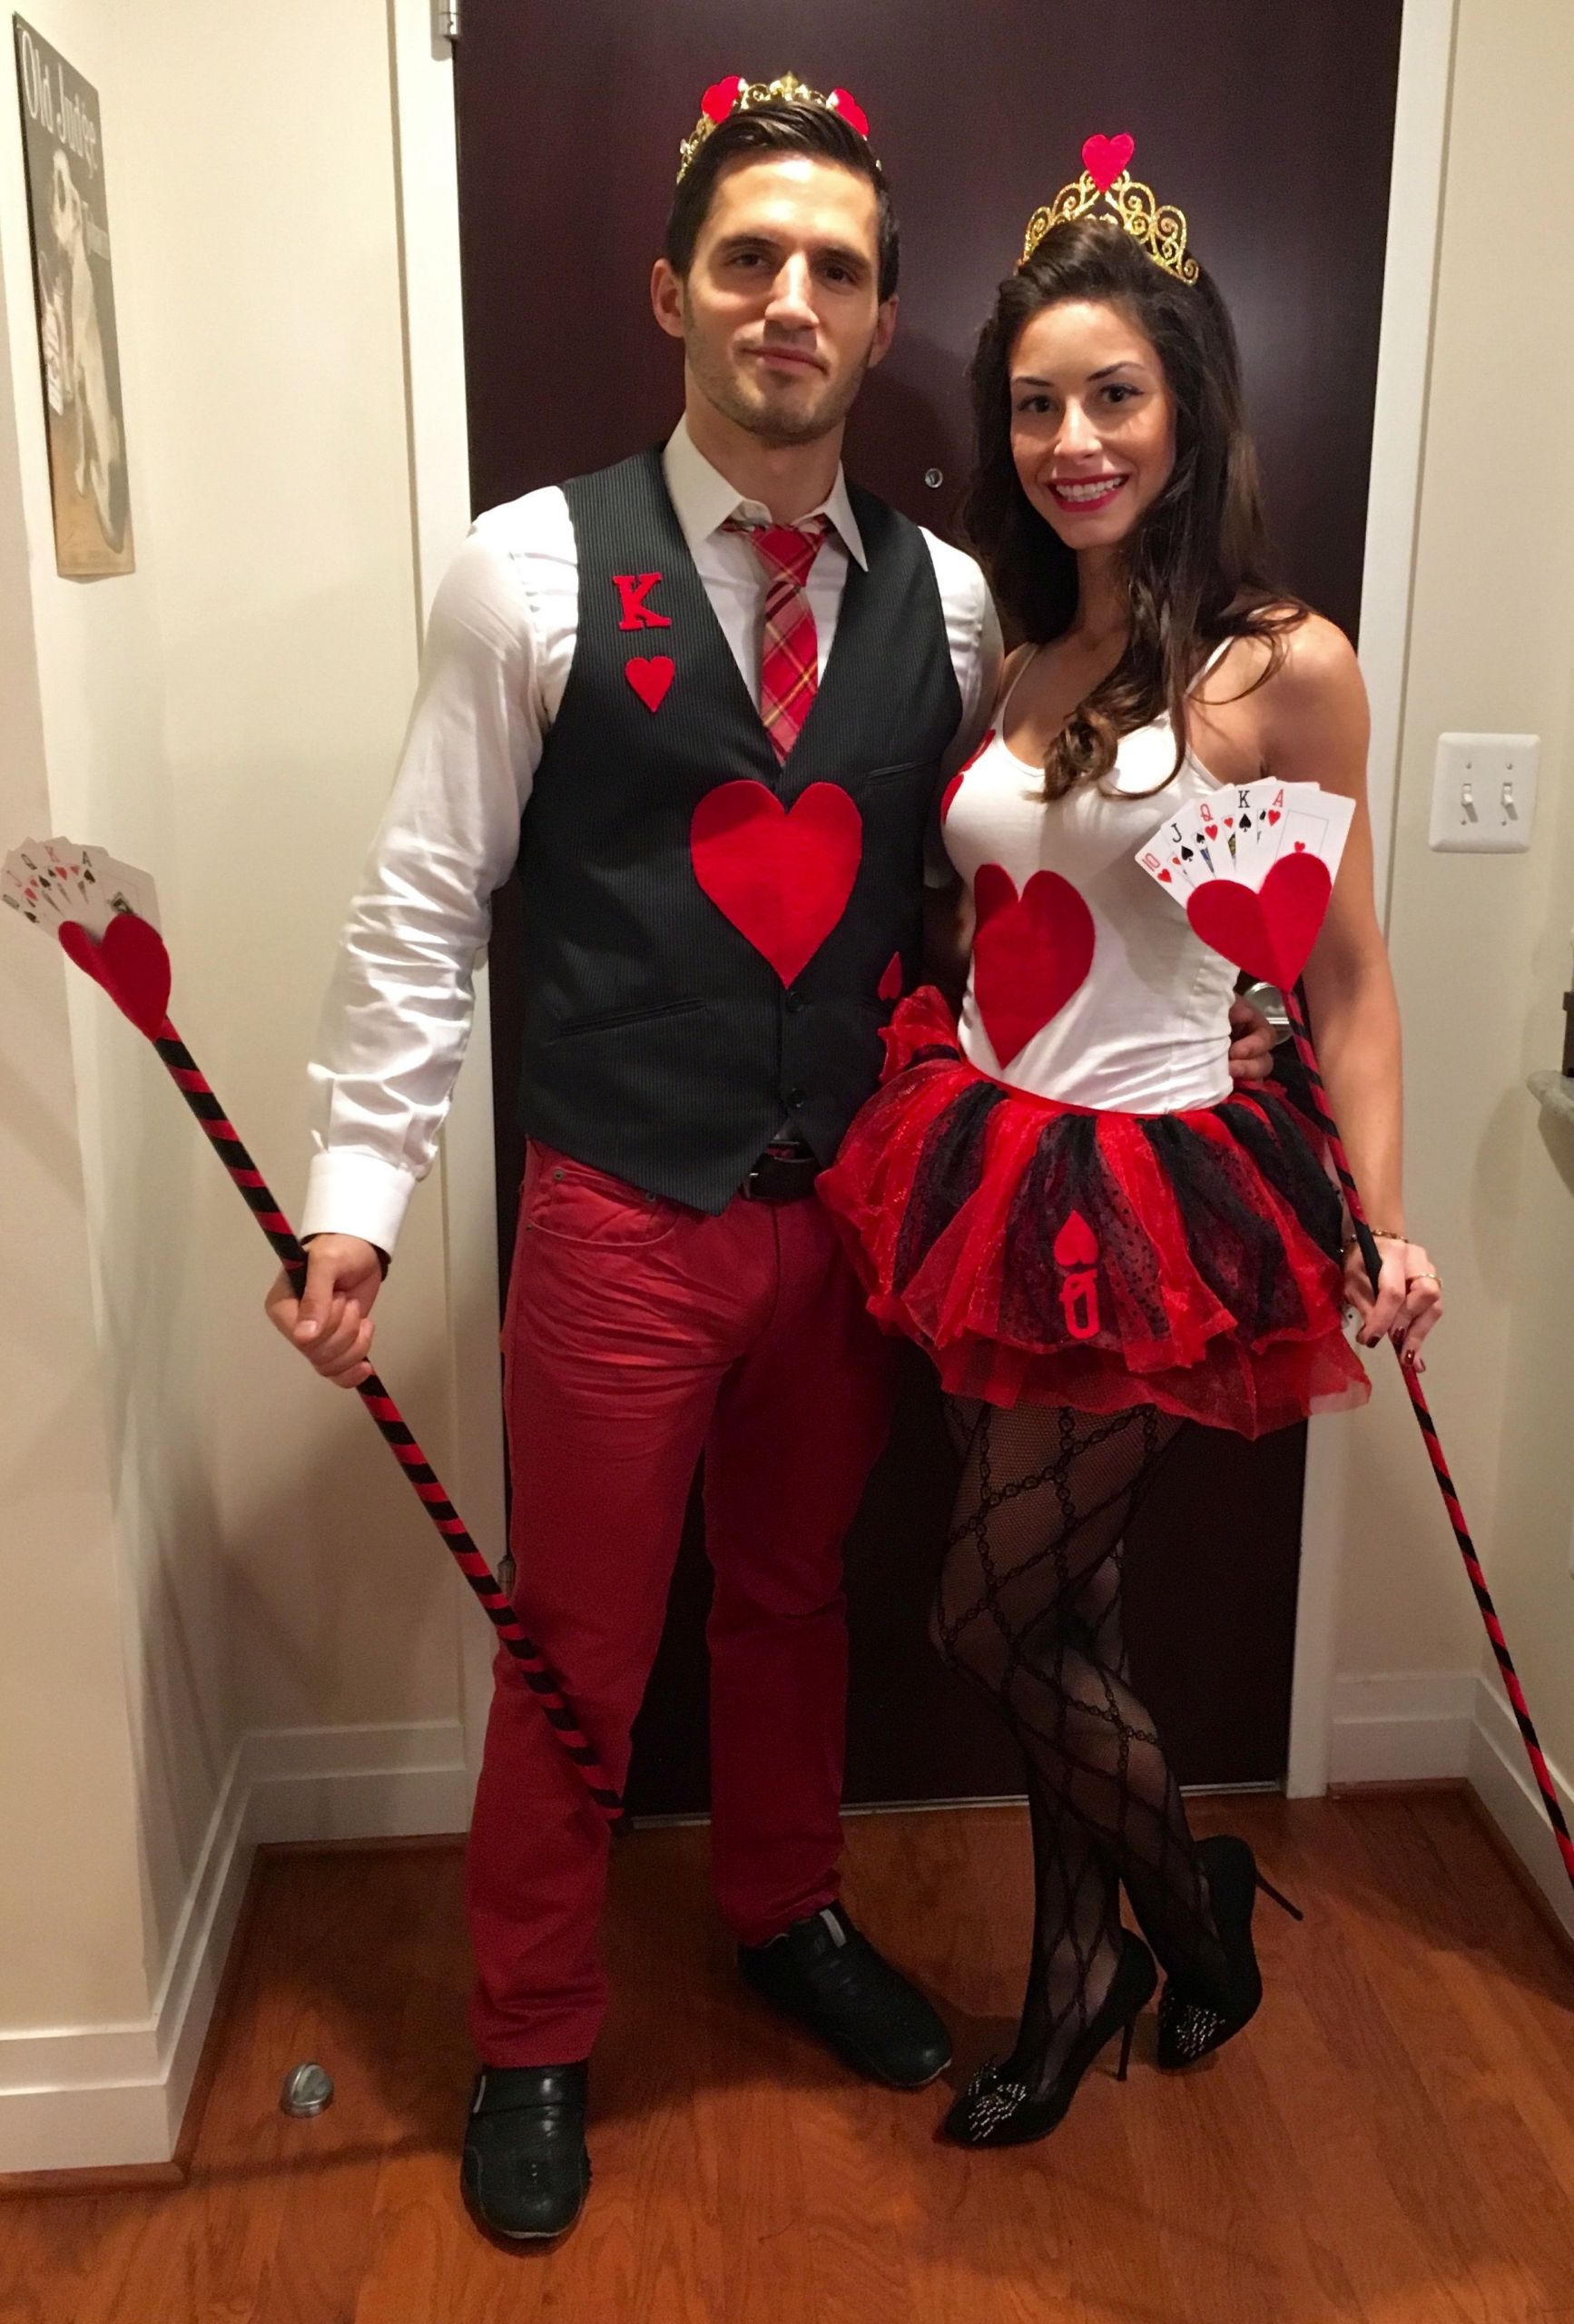 Cute Halloween Costume Ideas For Couples
 DIY King and Queen of Hearts Cute Creative Couples